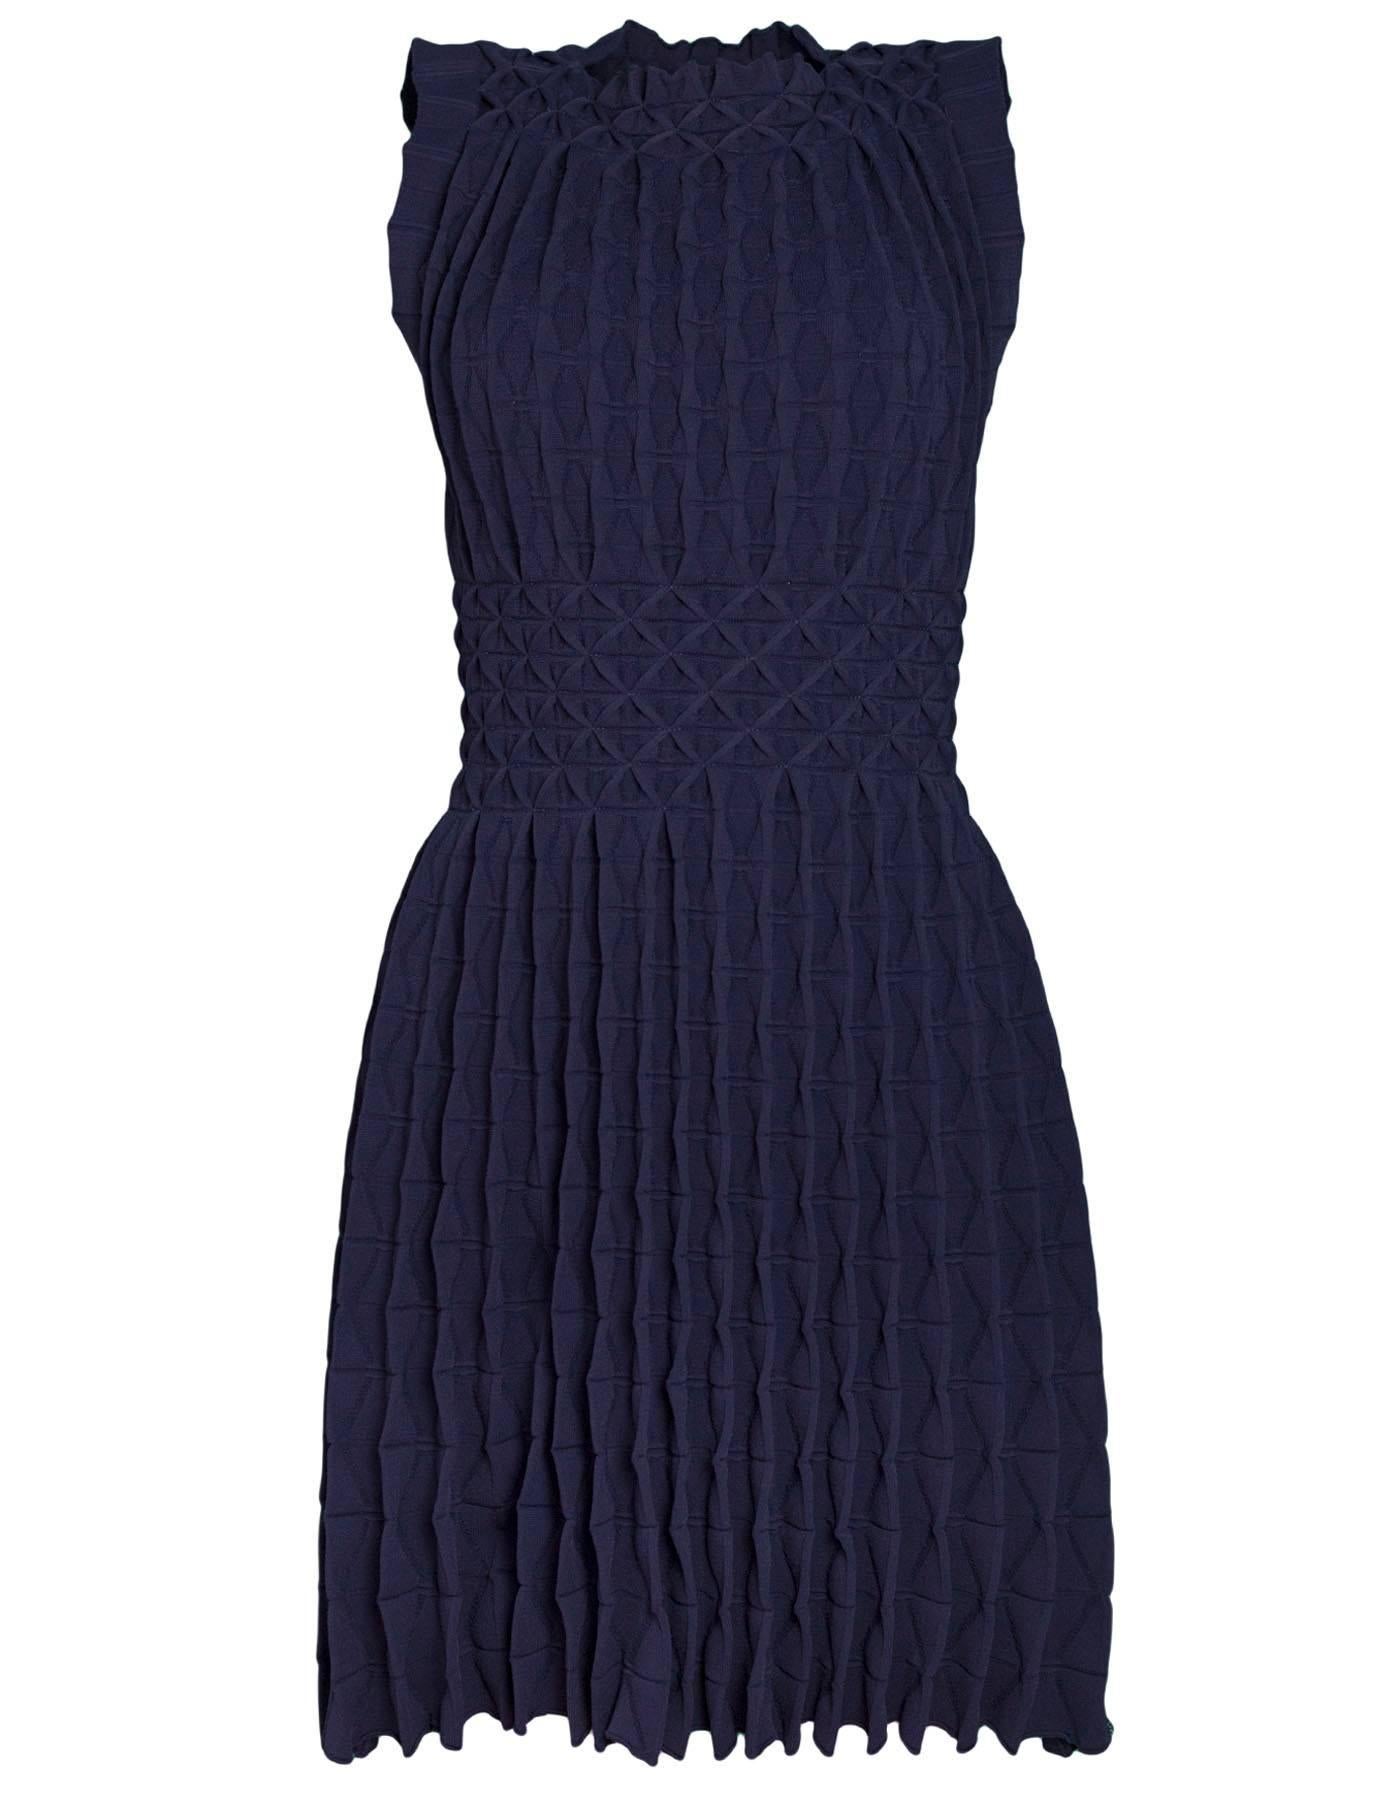 Alaia Navy Sleeveless Gathered Fit Flare 

Made In: Italy
Color: Navy
Composition: 80% viscose, 20% polyester
Lining: None
Closure/Opening: Pull over
Exterior Pockets: None
Interior Pockets: None
Overall Condition: Excellent pre-owned